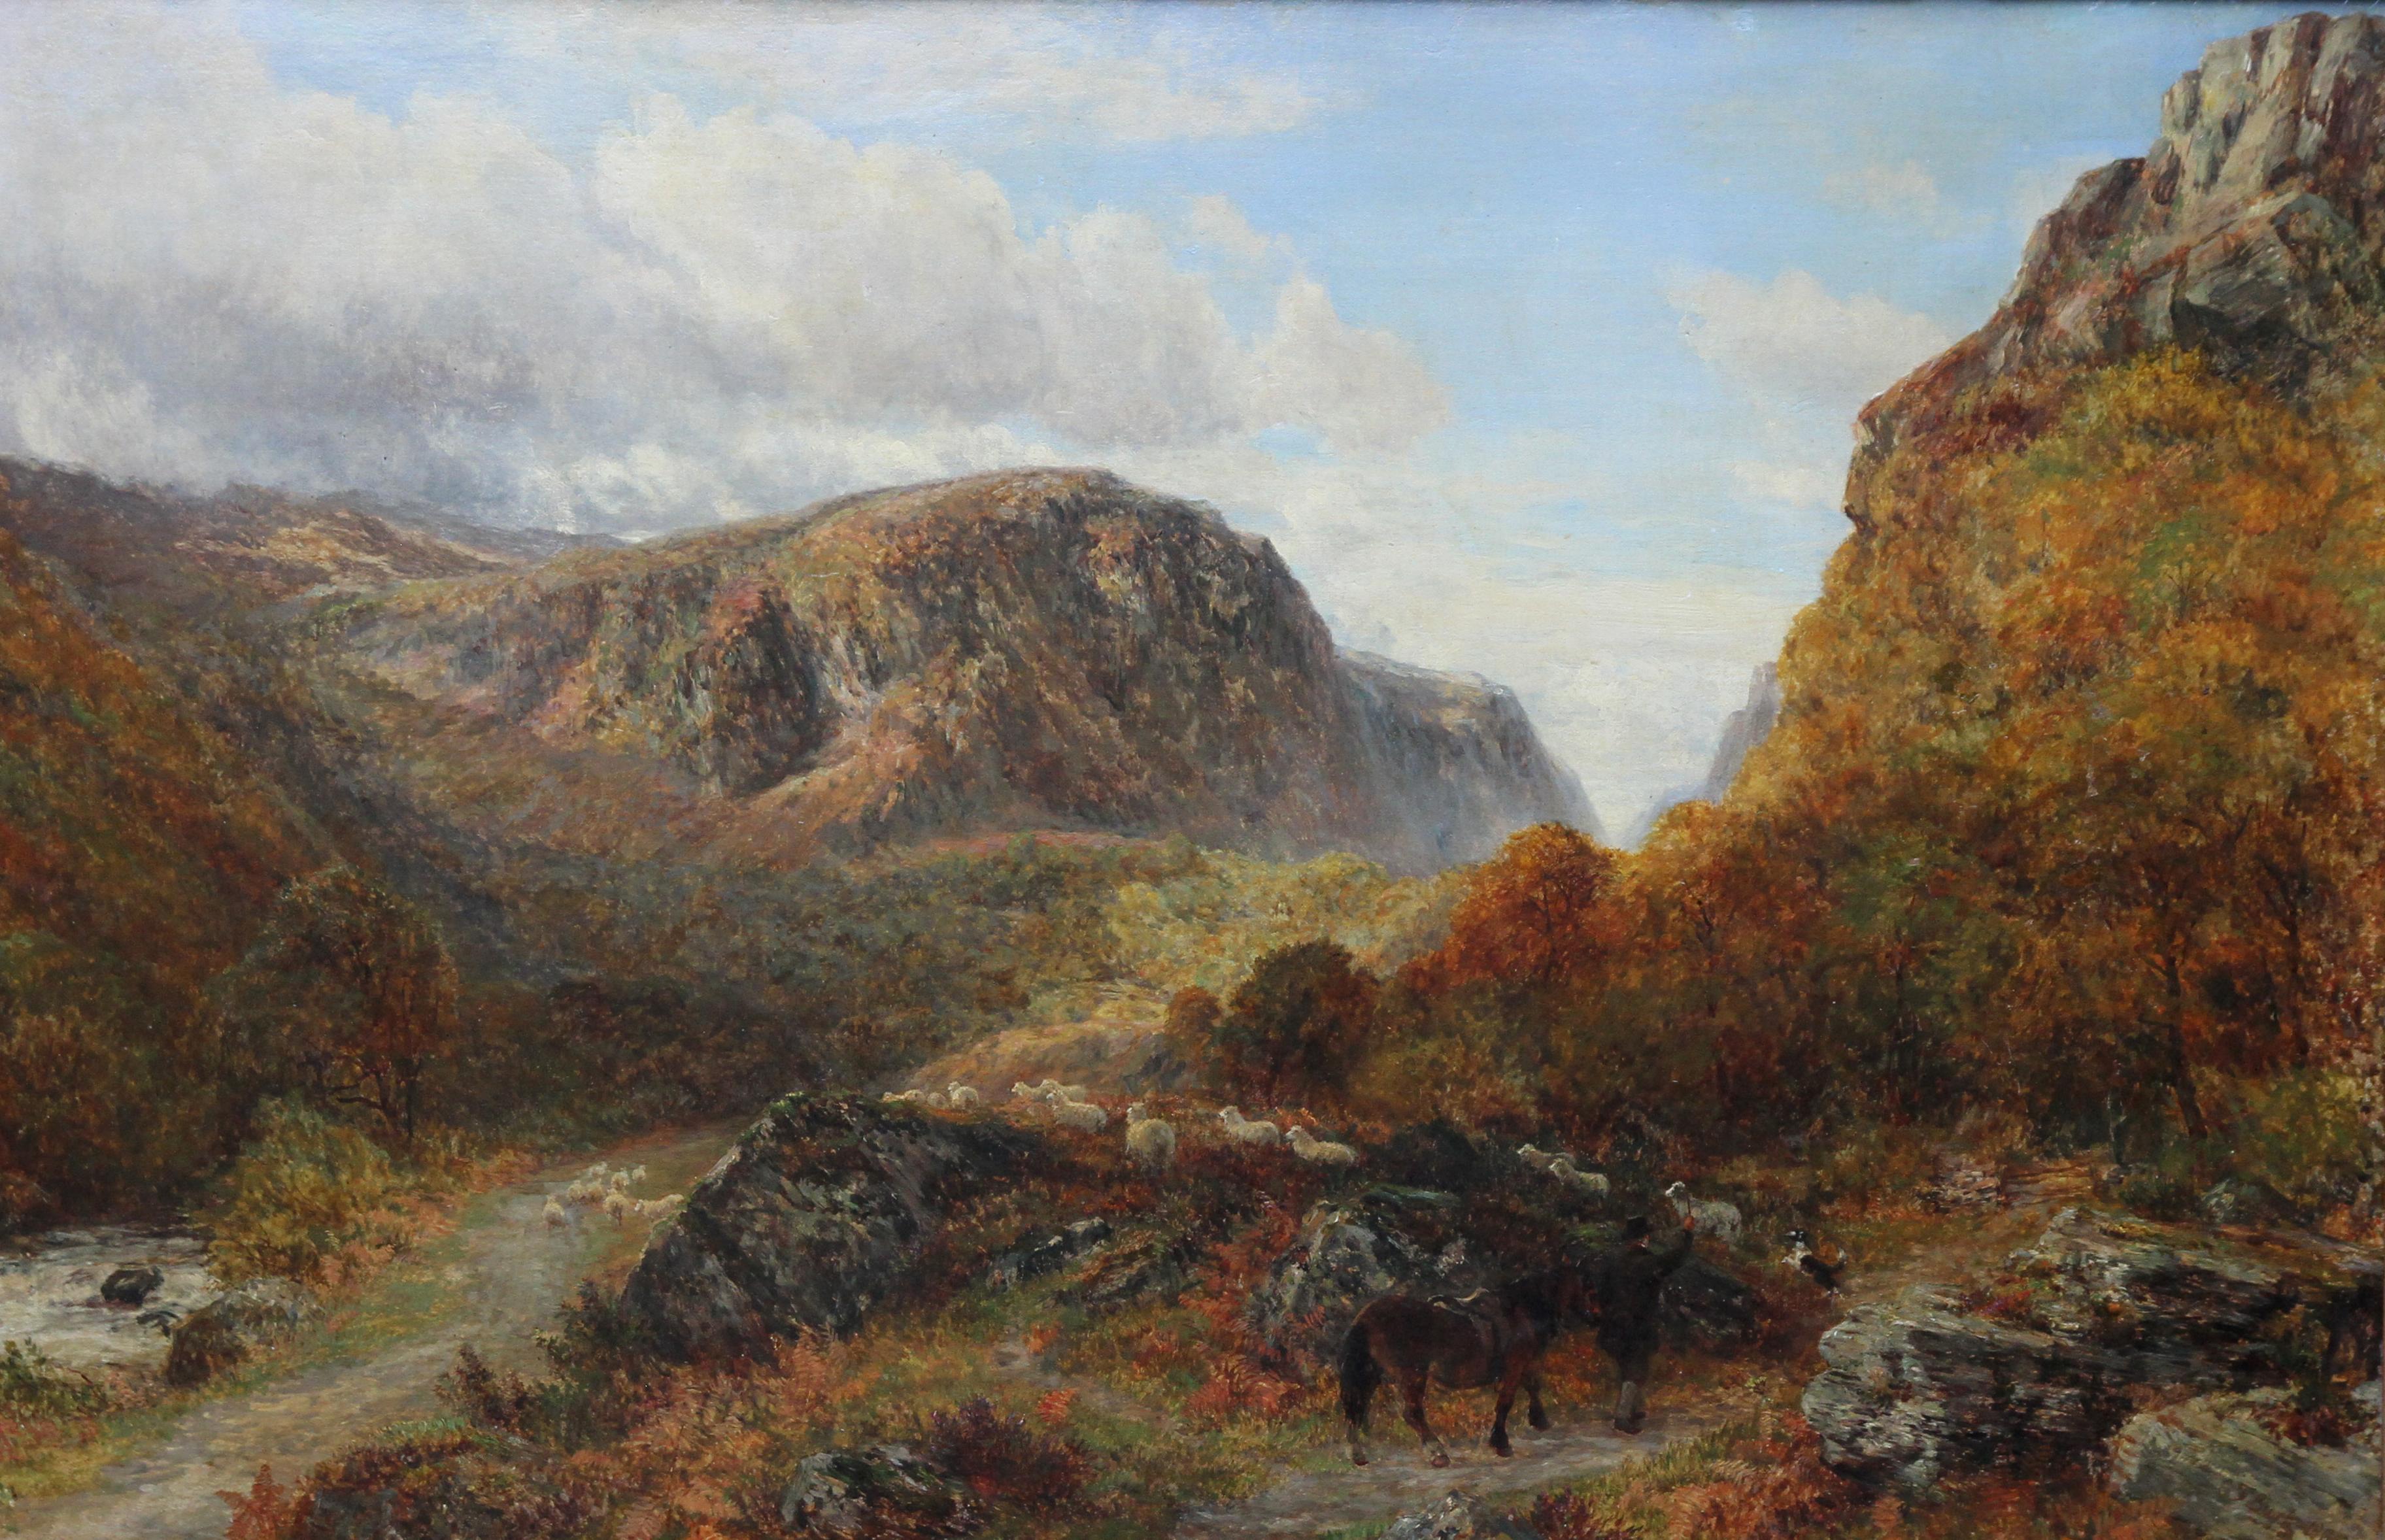 Gathering the Sheep - British Victorian art landscape oil painting Snowdon Wales - Painting by Charles Thomas Burt